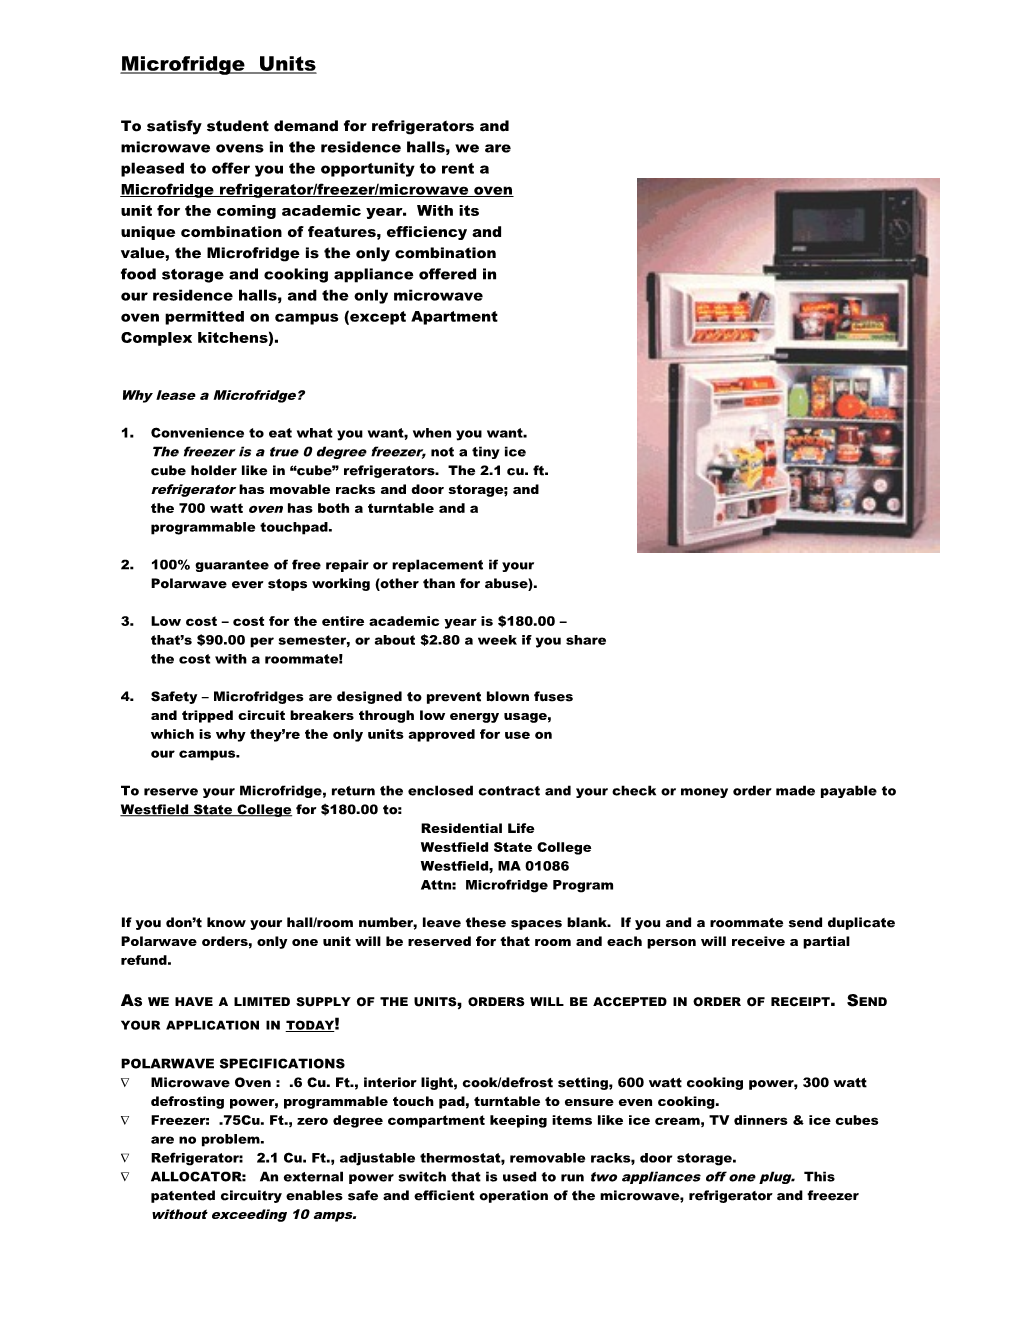 To Satisfy Student Demand for Refrigerators and Microwave Ovens in the Residence Halls